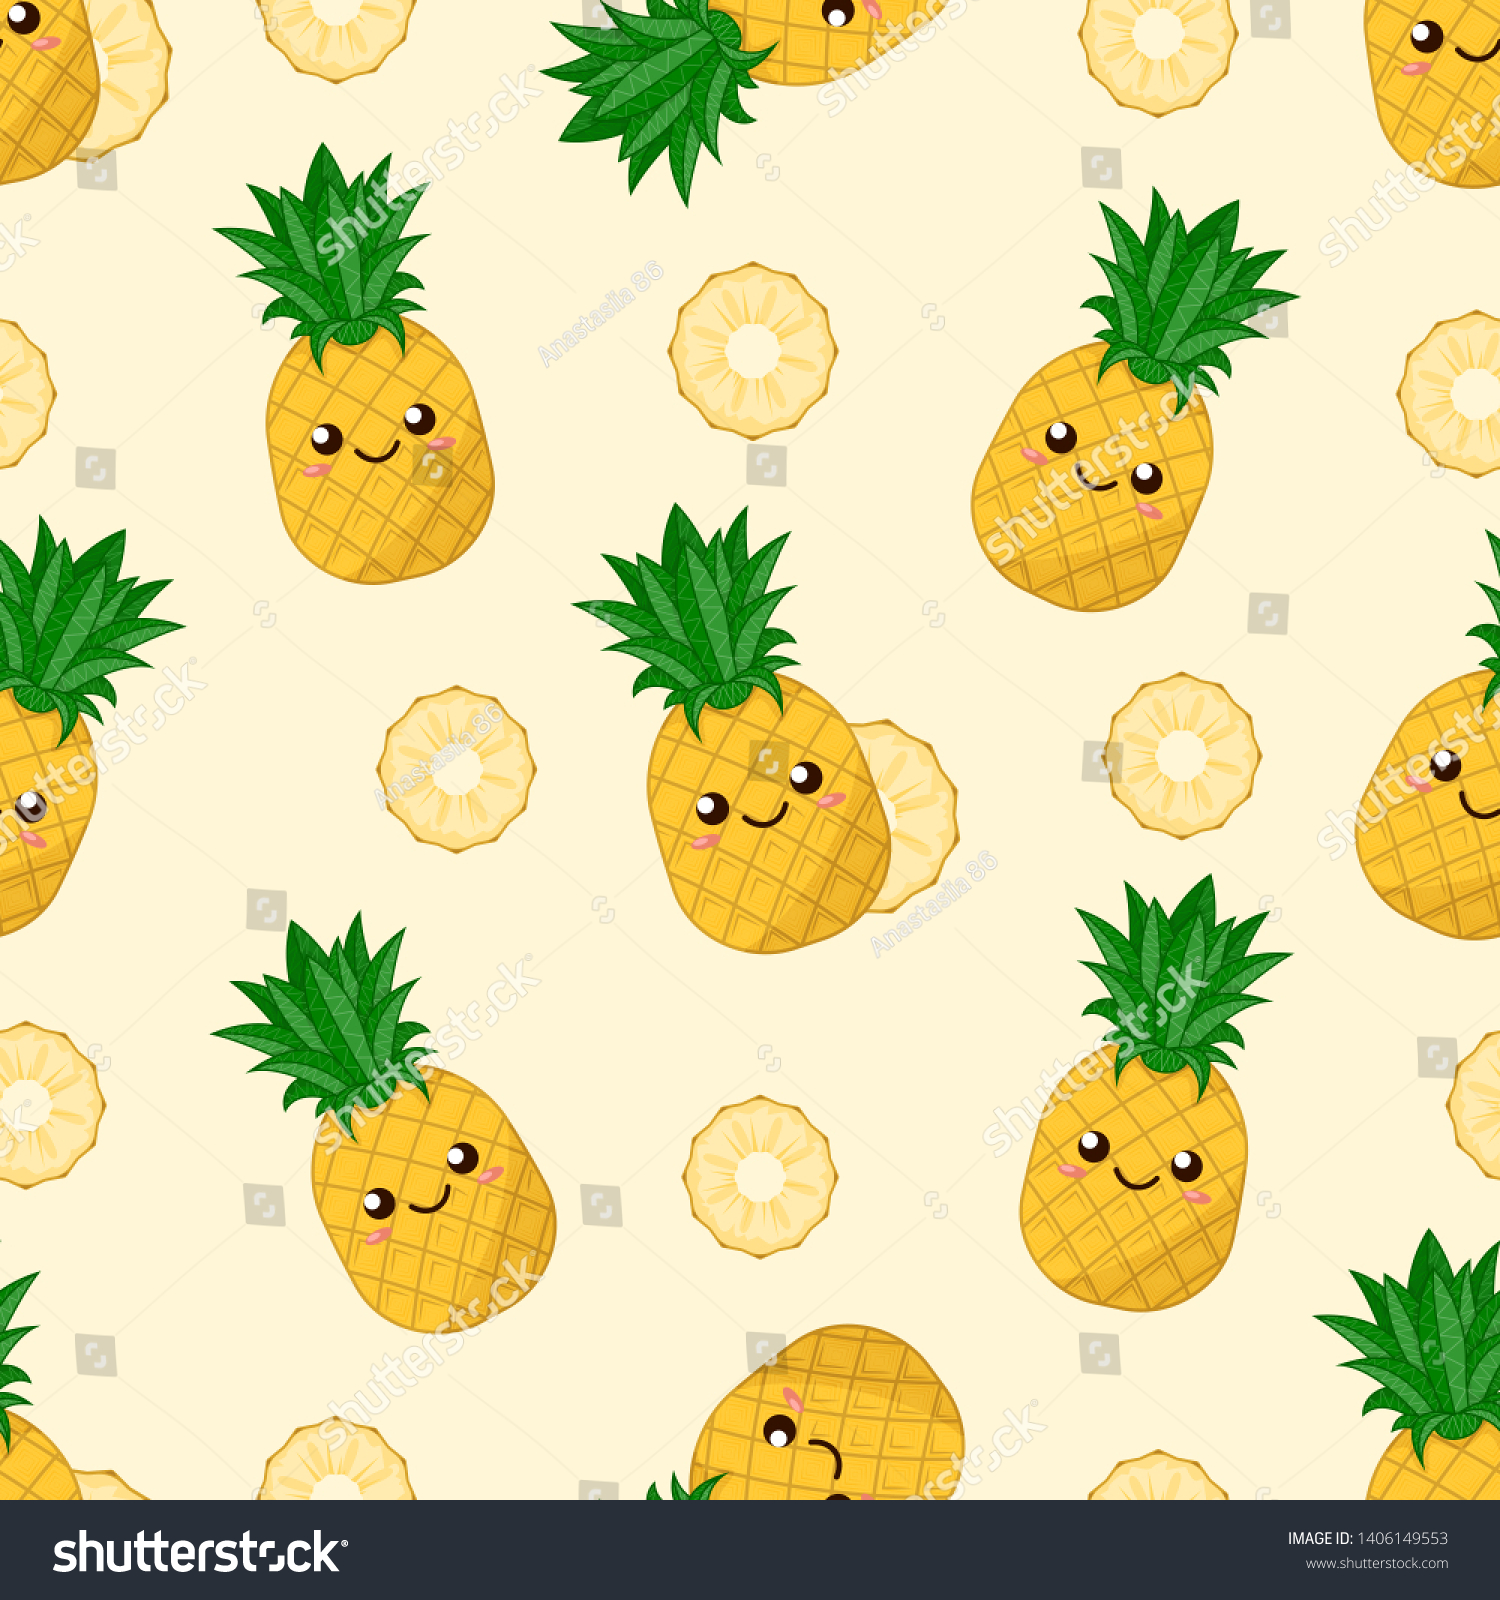 seamless pattern cute kawaii pineapples round stock vector royalty free 1406149553 https www shutterstock com image vector seamless pattern cute kawaii pineapples round 1406149553